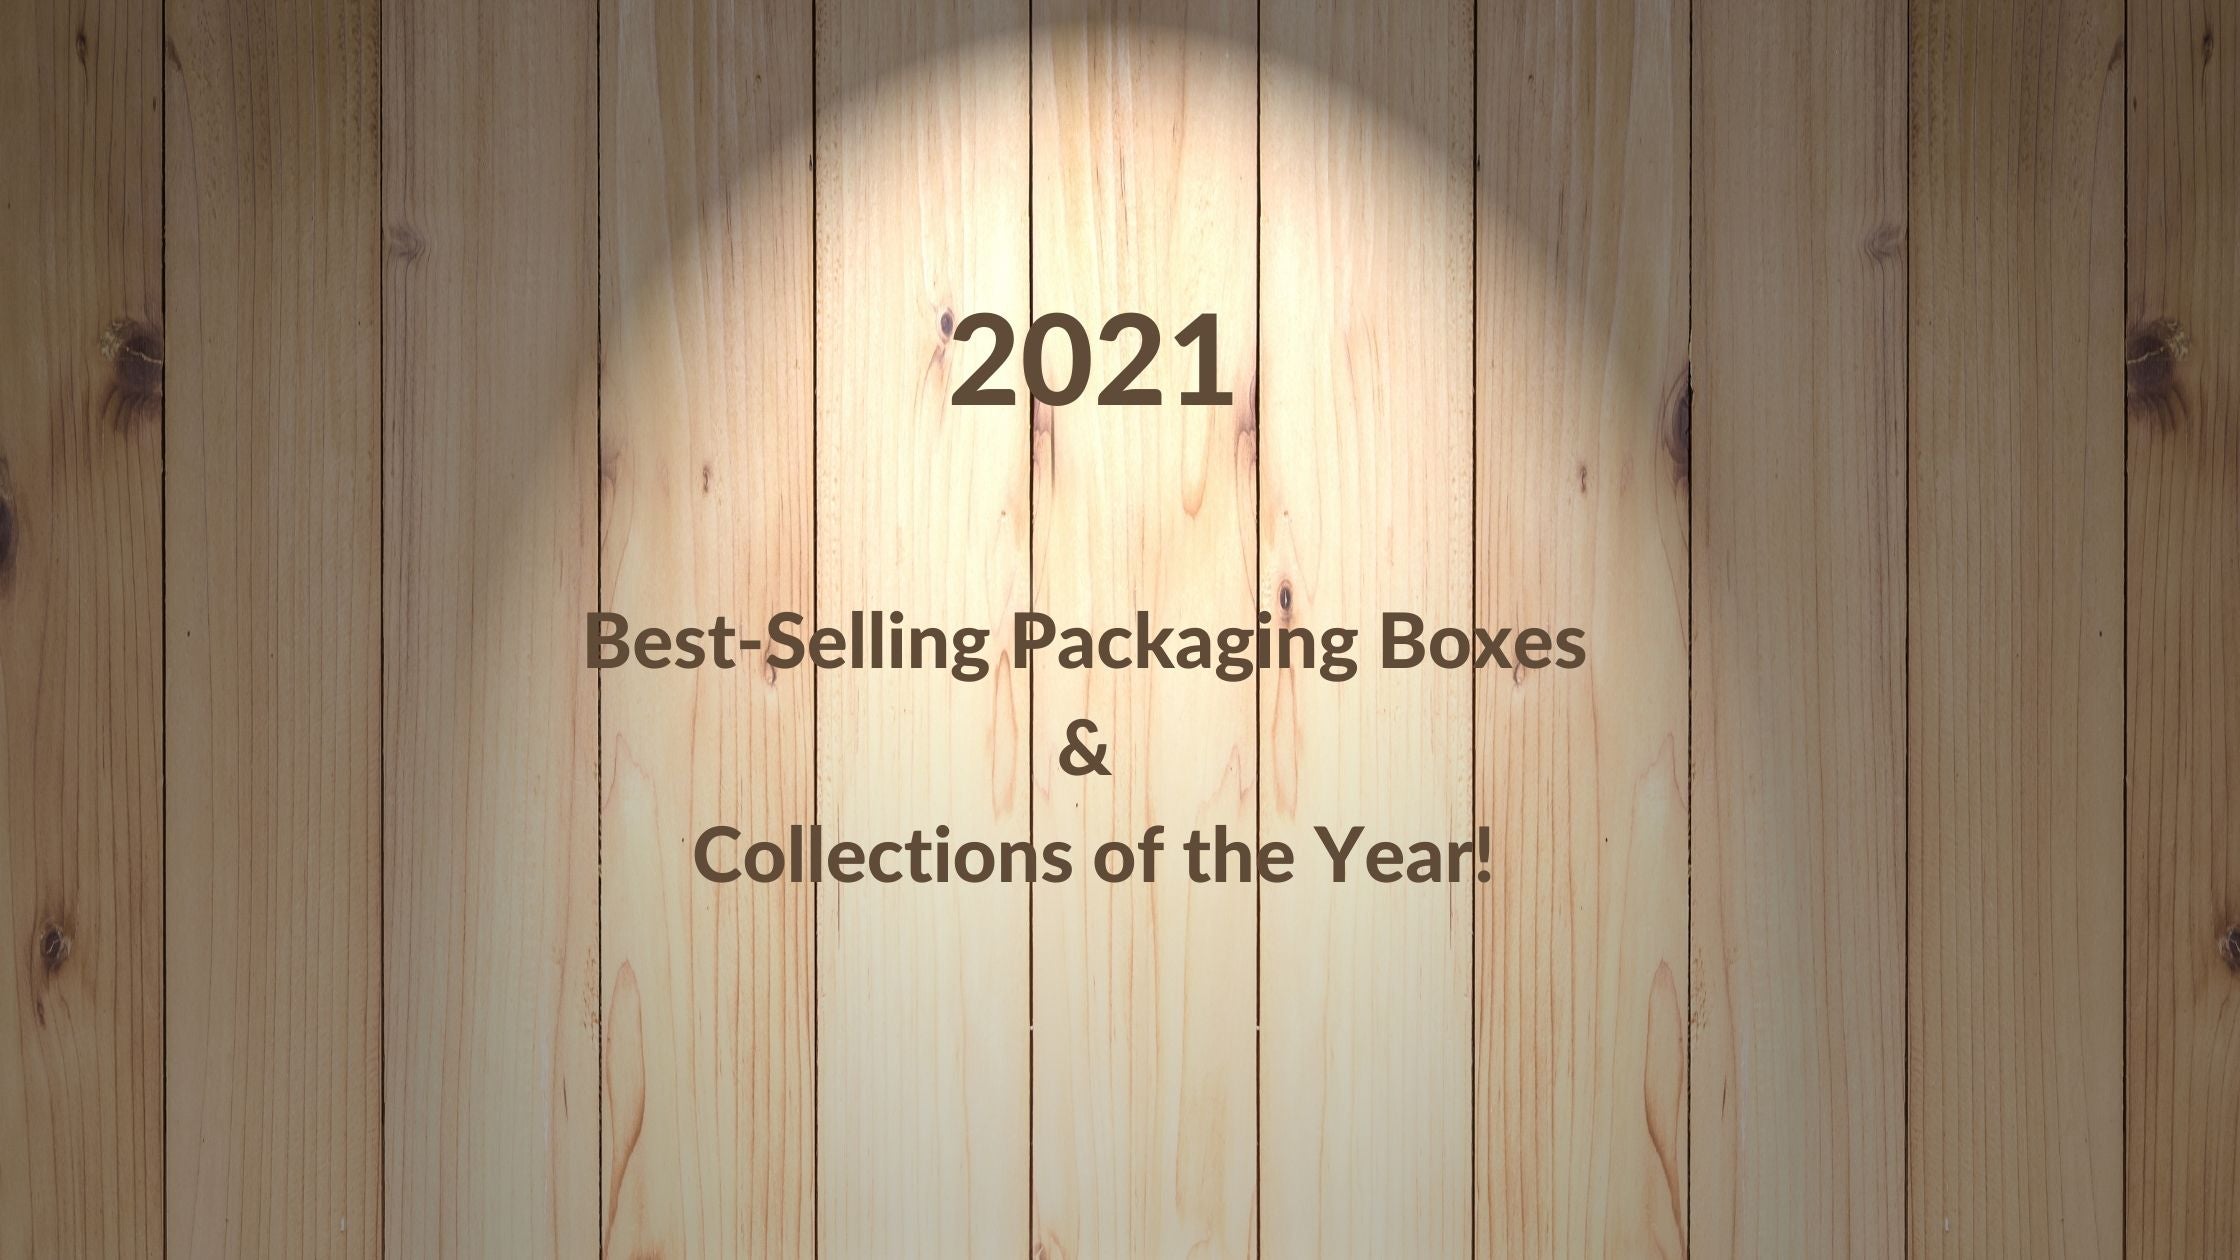 2021: Best Selling Packaging Boxes & Collections of the Year